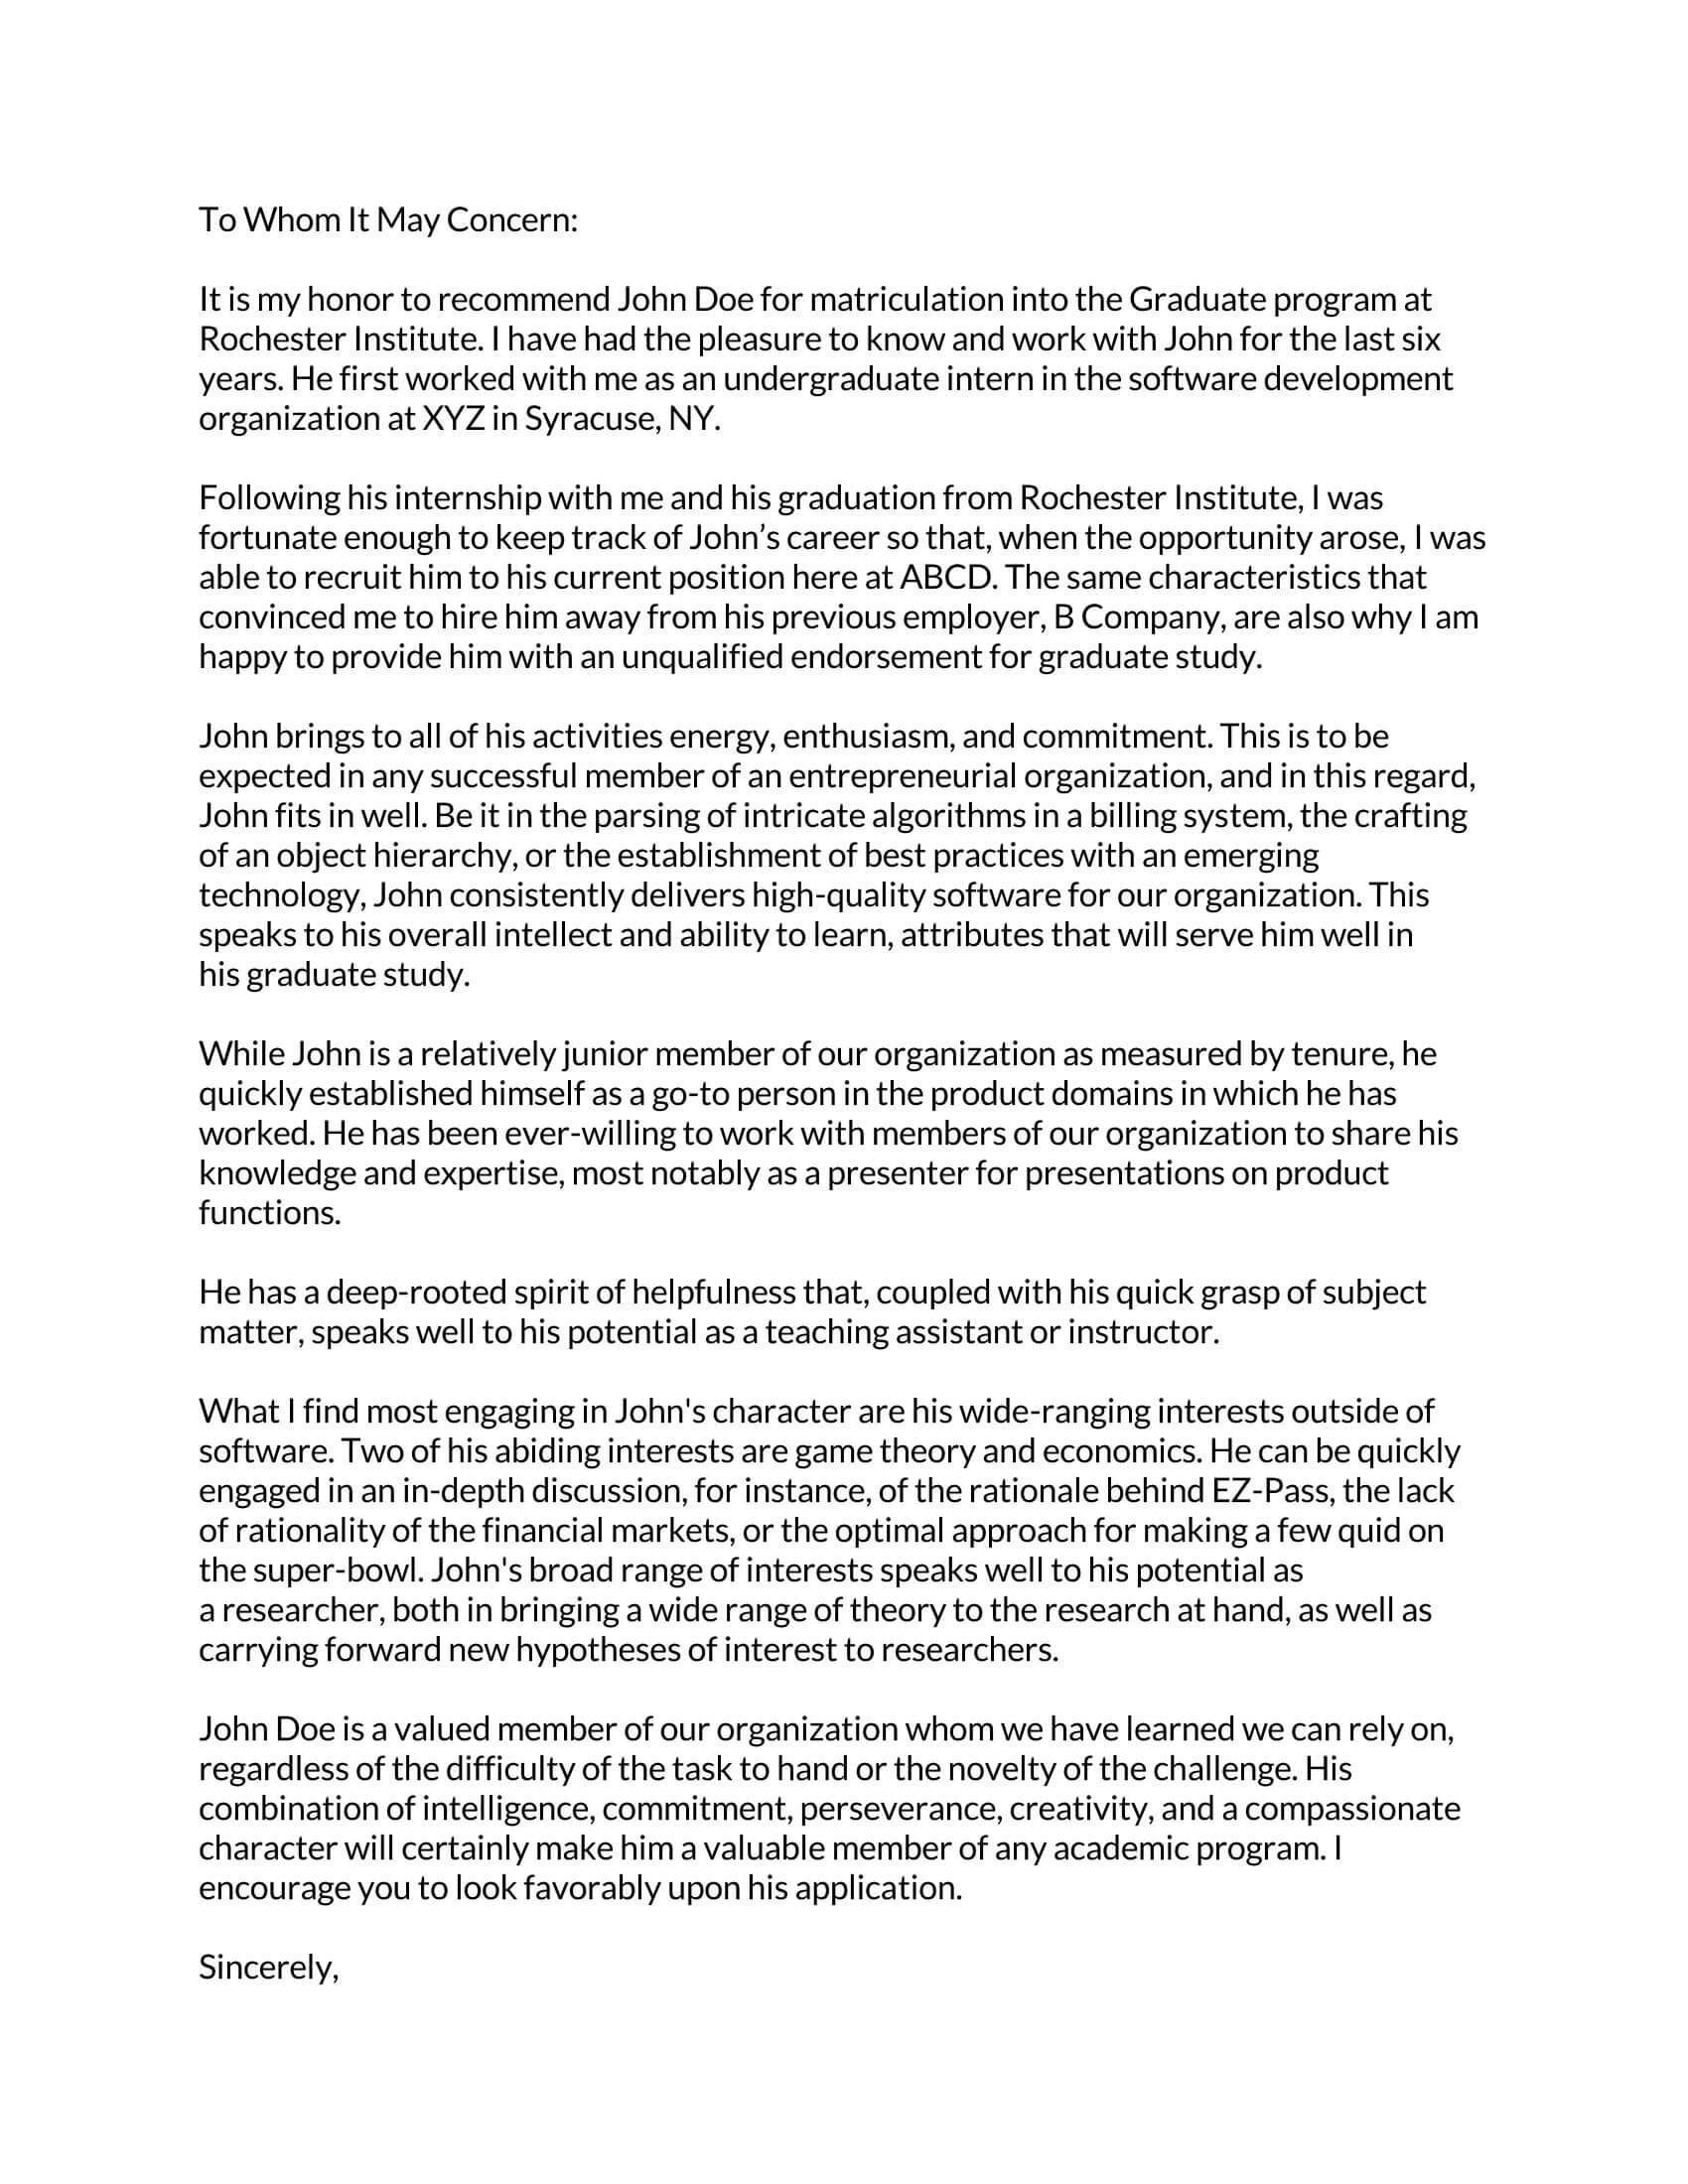 Printable graduate school reference letter sample for free download